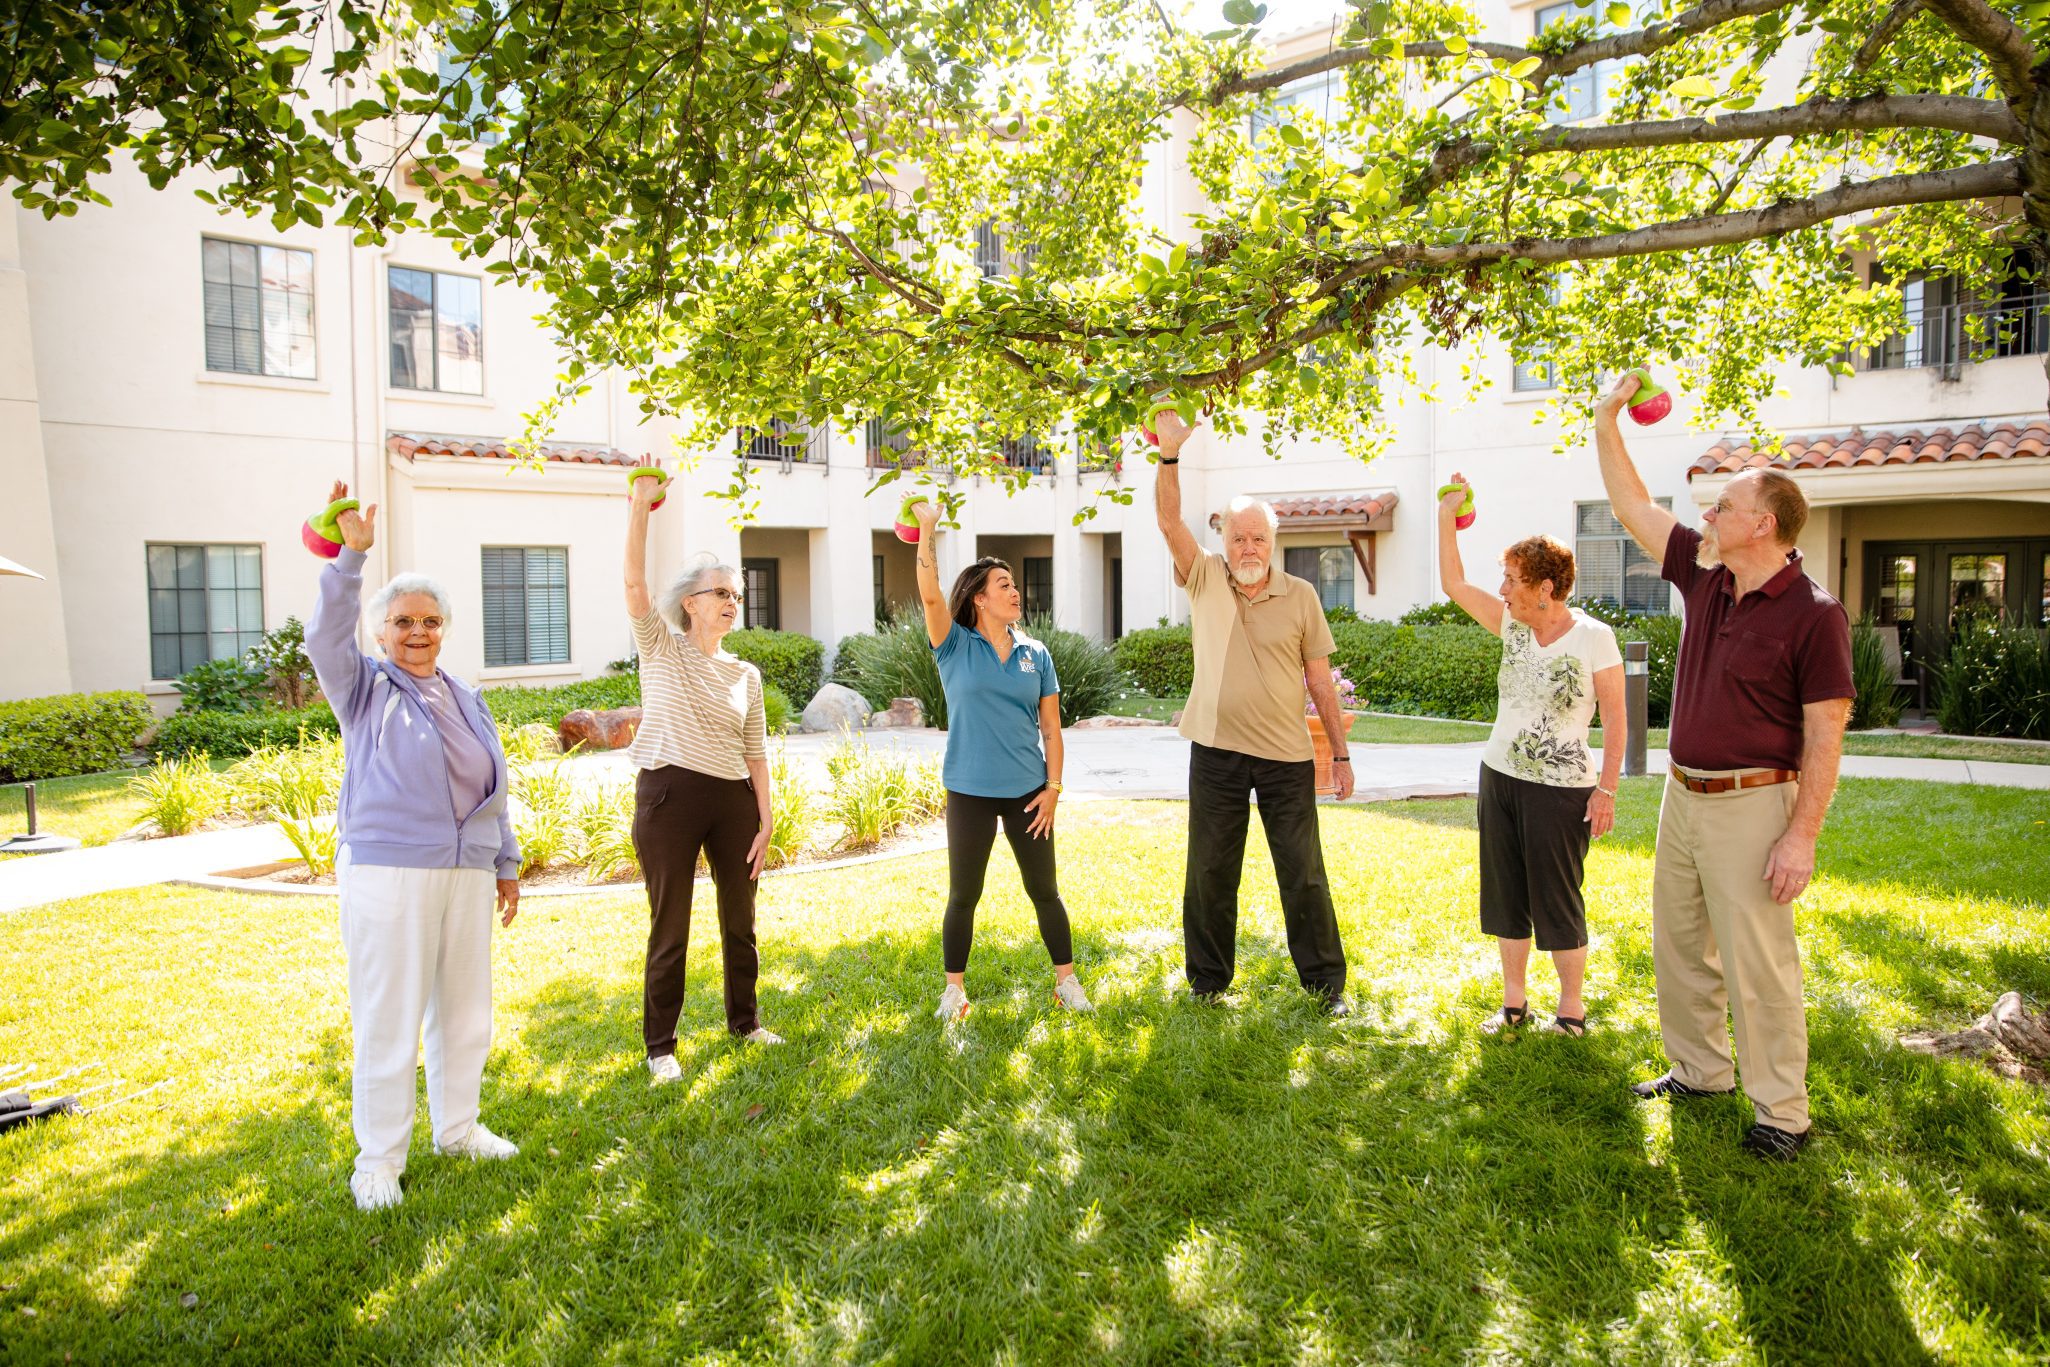 Five elderly people doing exercises outside next to a tree